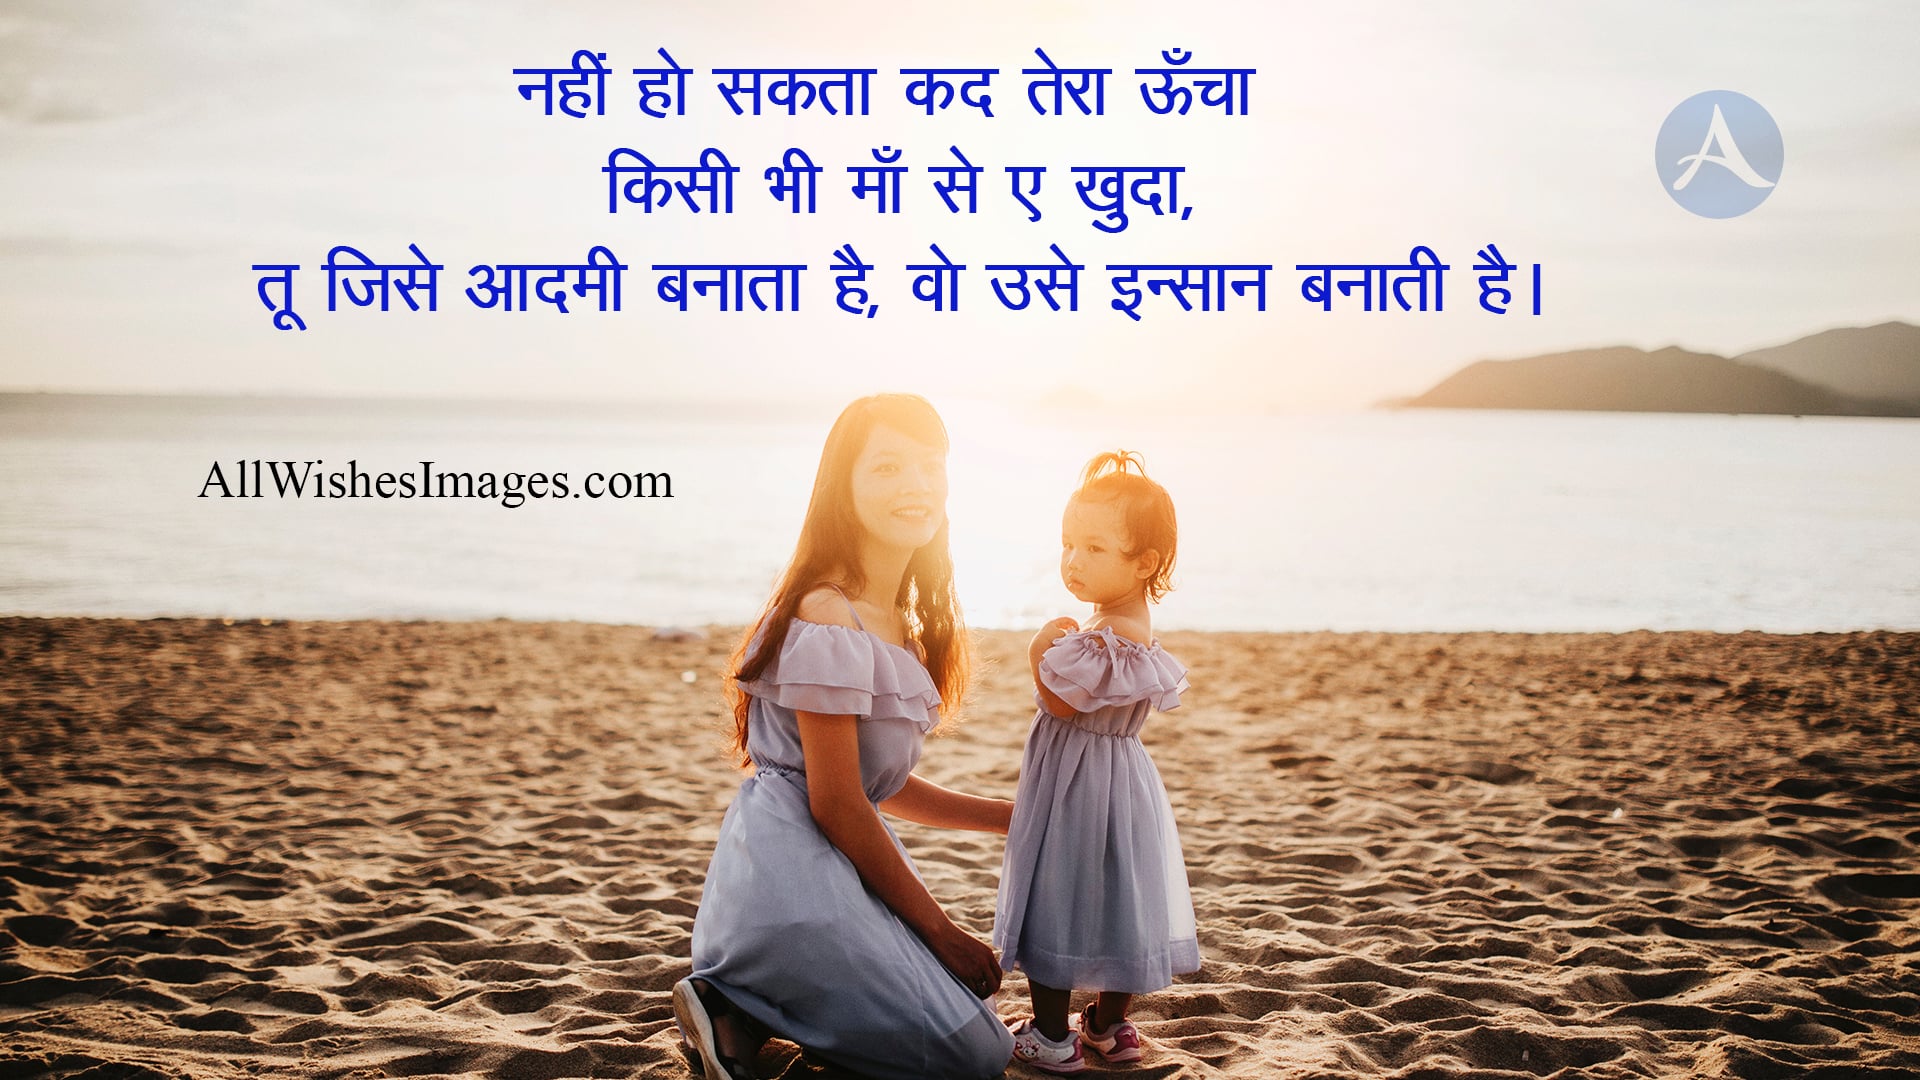 Maa Shayari Images In Hindi - All Wishes Images - Images for WhatsApp